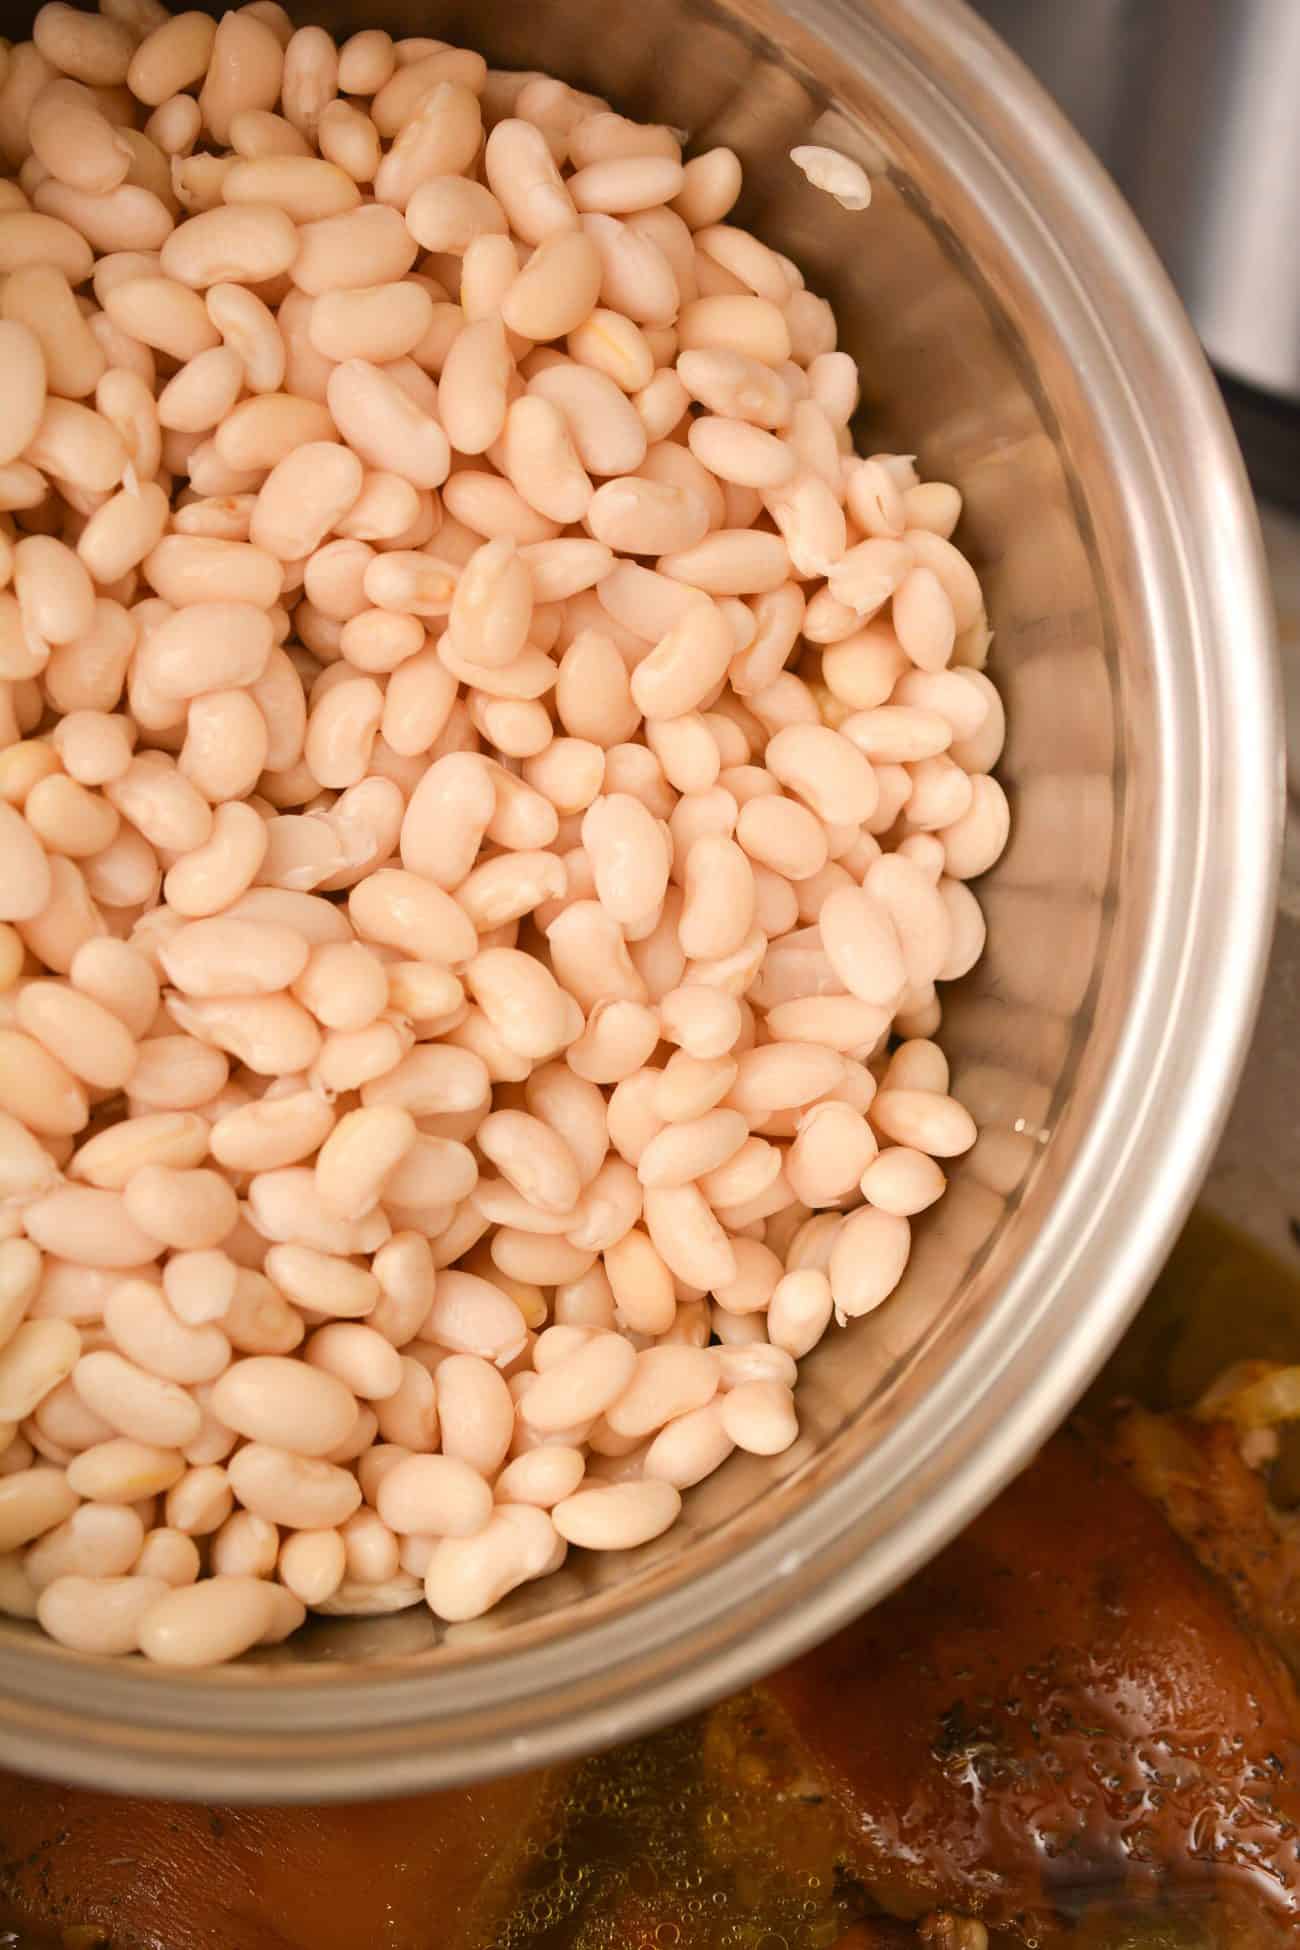 Fit a pot with water and bring to a boil. Remove the pot from the heat, pour in the beans, and soak for 2 hours.